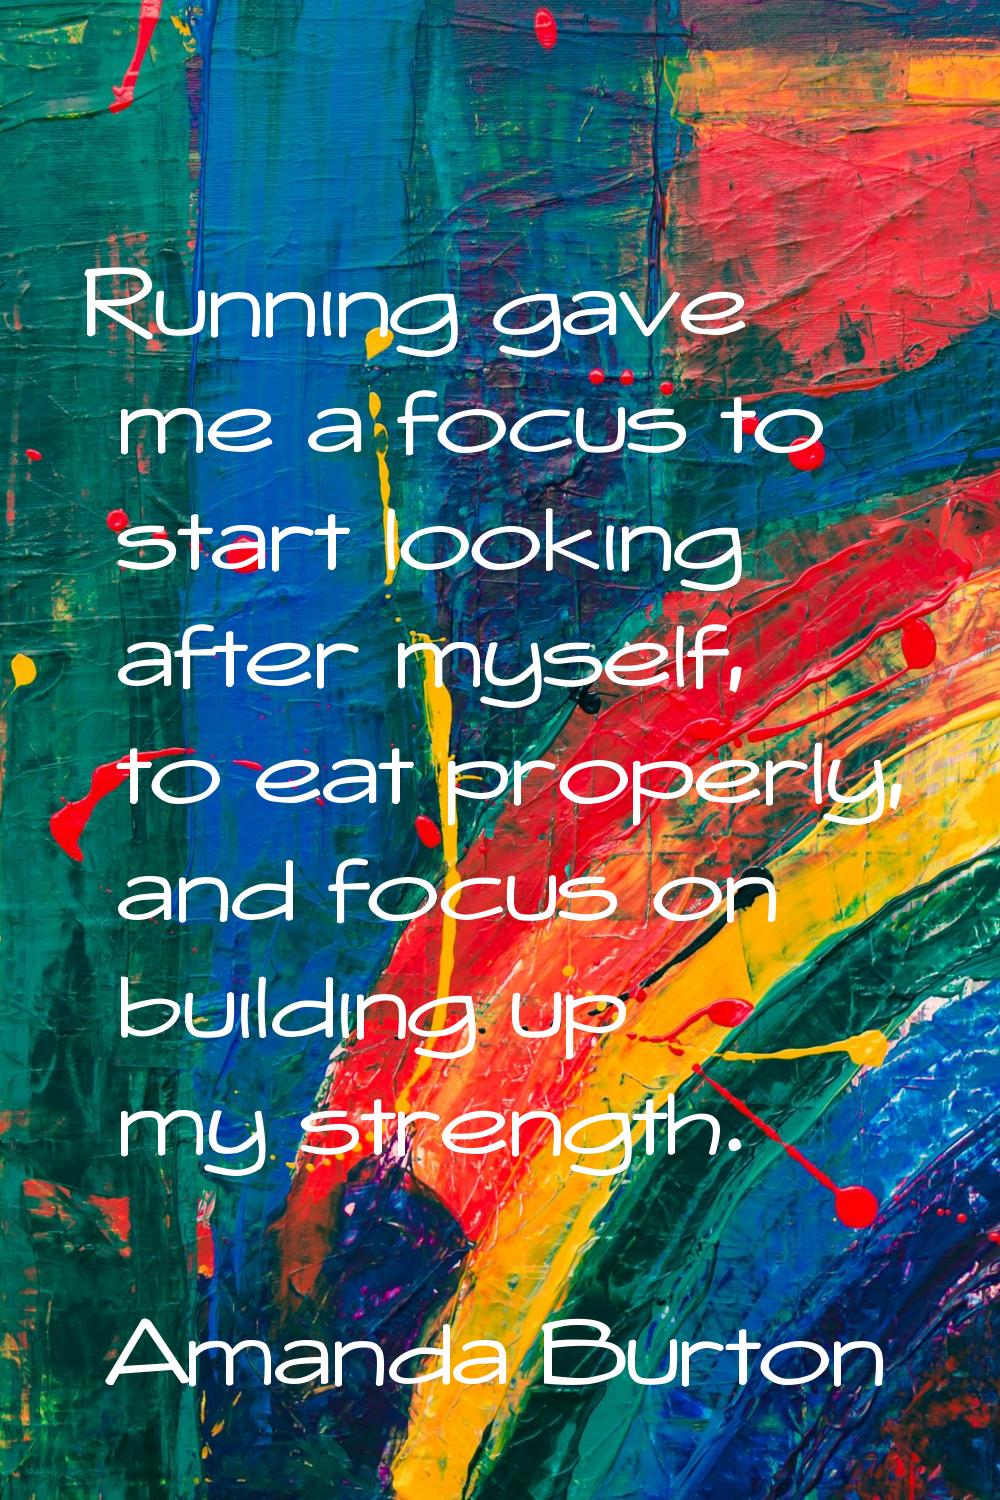 Running gave me a focus to start looking after myself, to eat properly, and focus on building up my